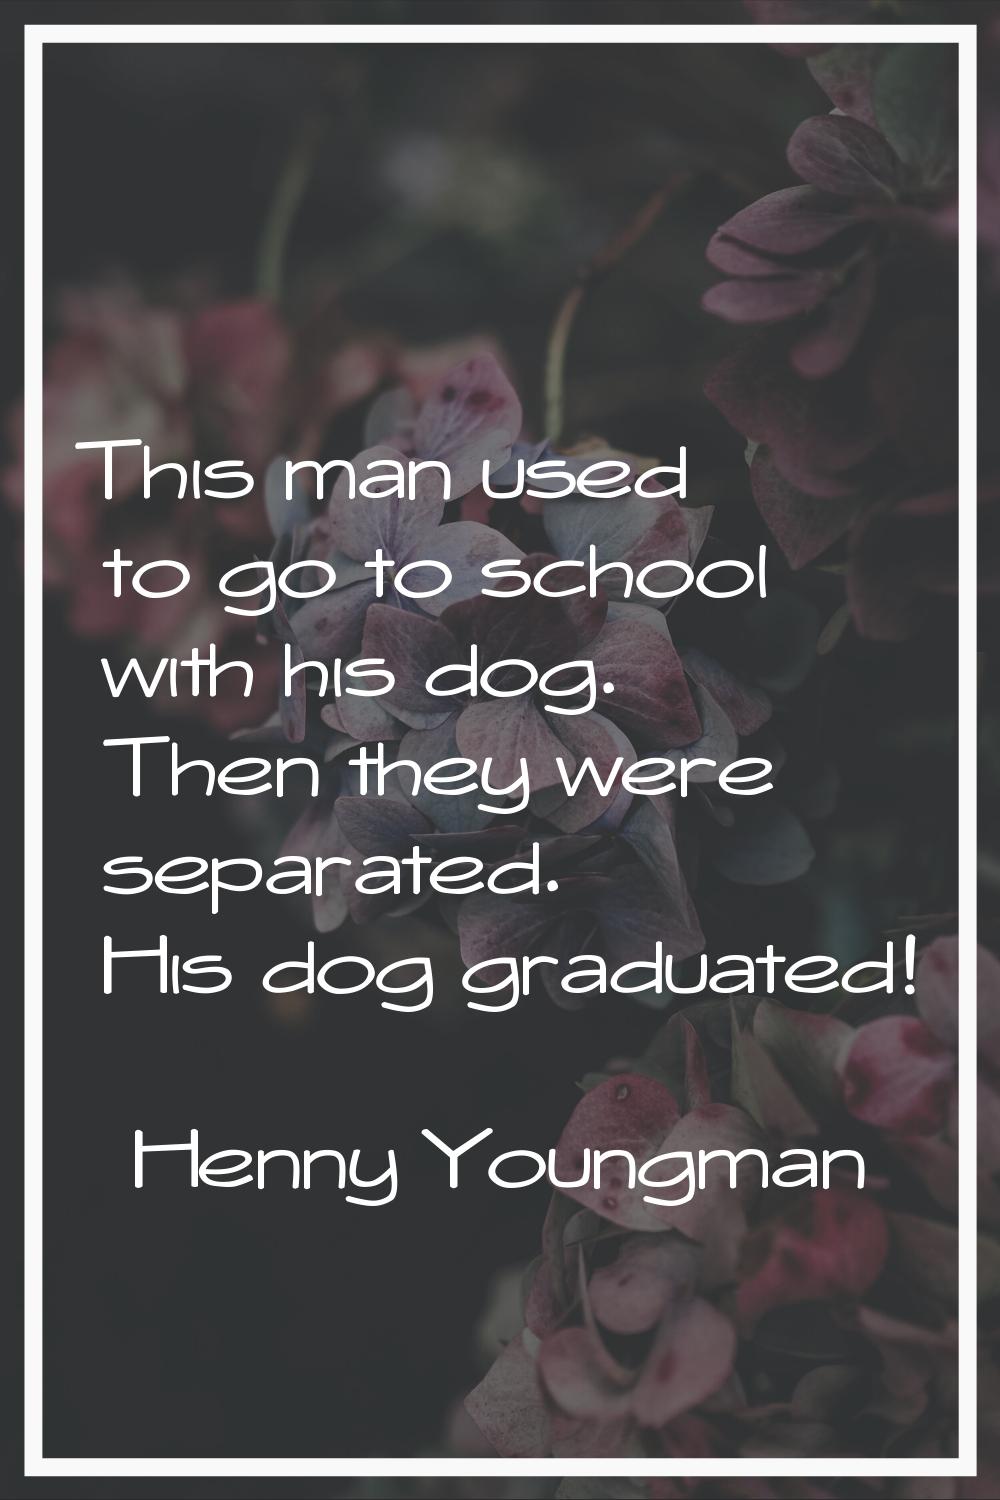 This man used to go to school with his dog. Then they were separated. His dog graduated!